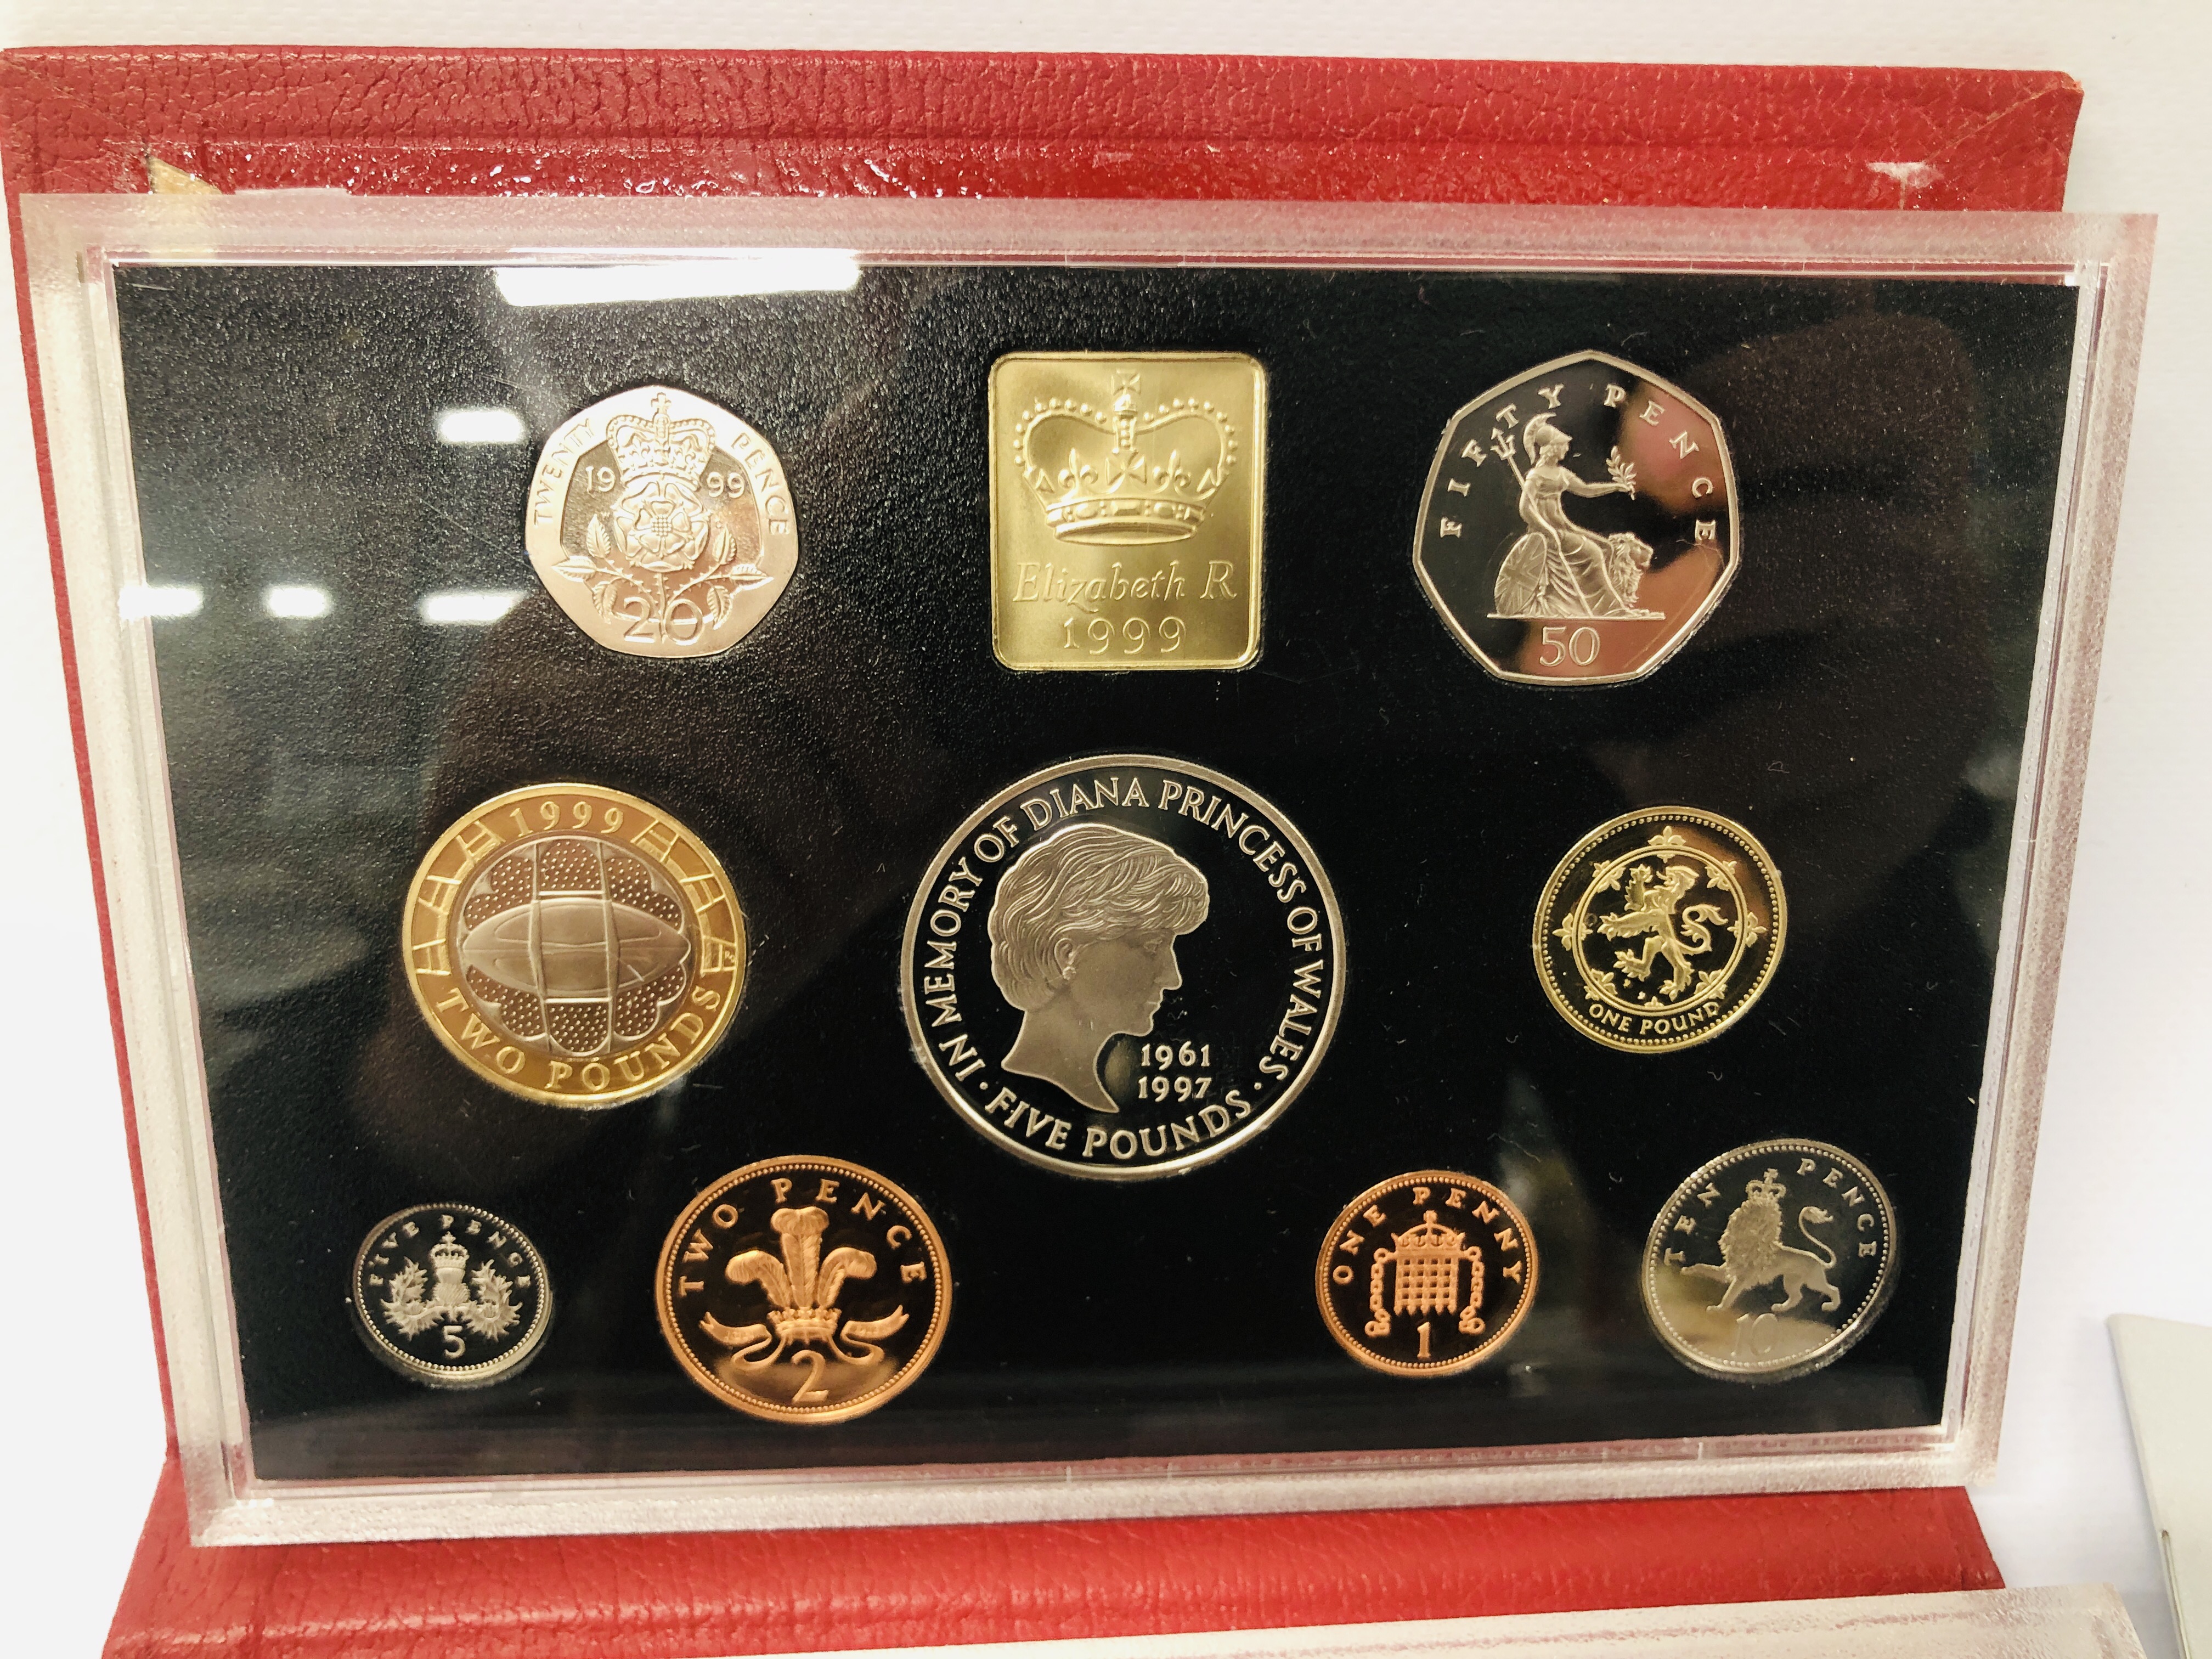 1999 UNITED KINGDOM PROOF COIN COLLECTION WITH CERTIFICATE AND FAREWELL TO THE £.S. - Image 2 of 7